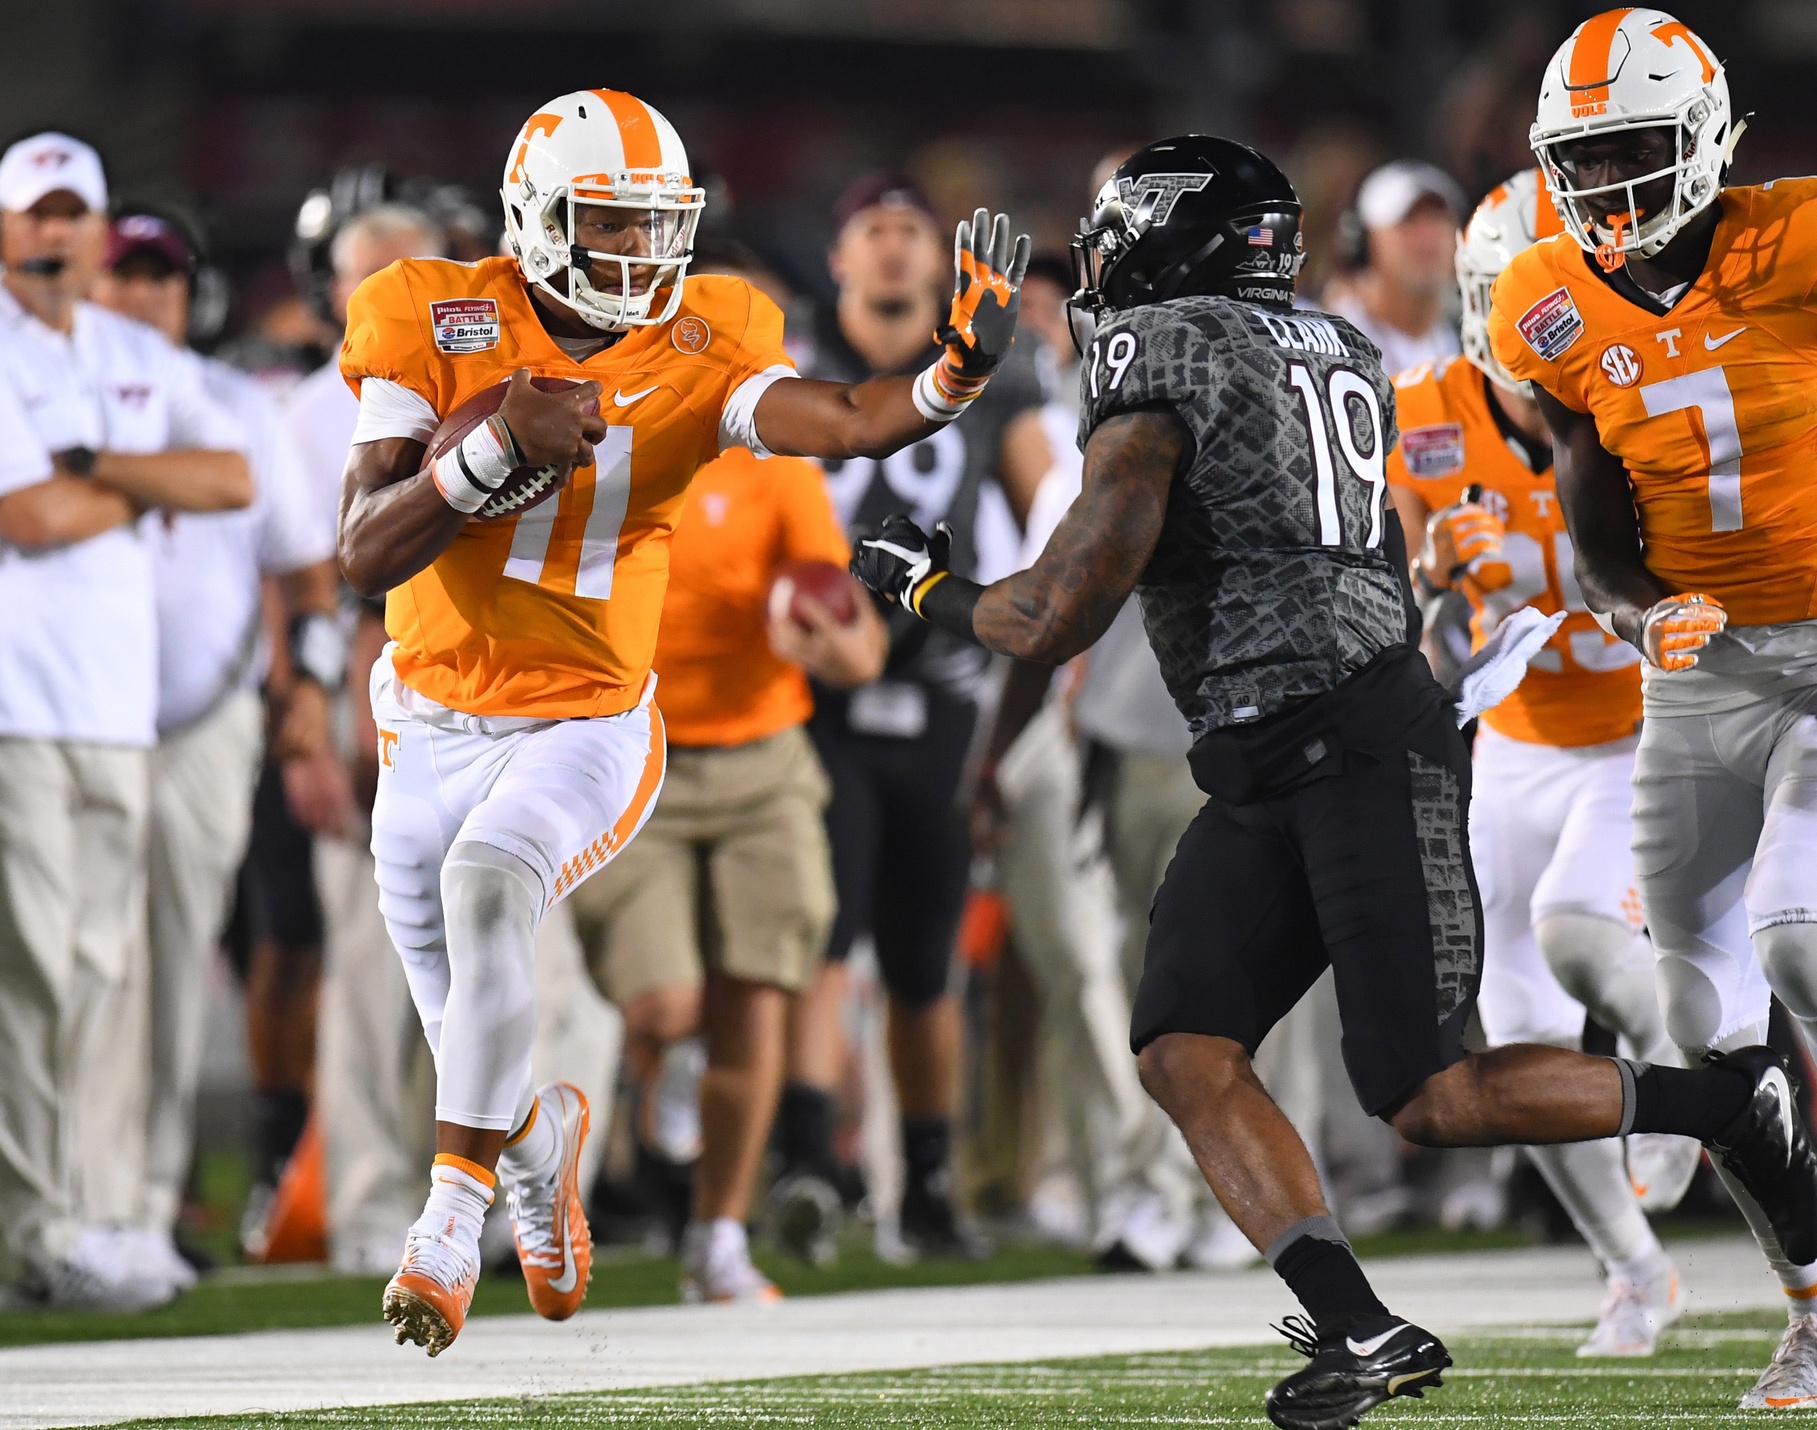 Sep 10, 2016; Bristol, TN, USA; Tennessee Volunteers quarterback Joshua Dobbs (11) fights off a tackle attempt by Virginia Tech Hokies defensive back Chuck Clark (19) during the first half at Bristol Motor Speedway. Mandatory Credit: Christopher Hanewinckel-USA TODAY Sports